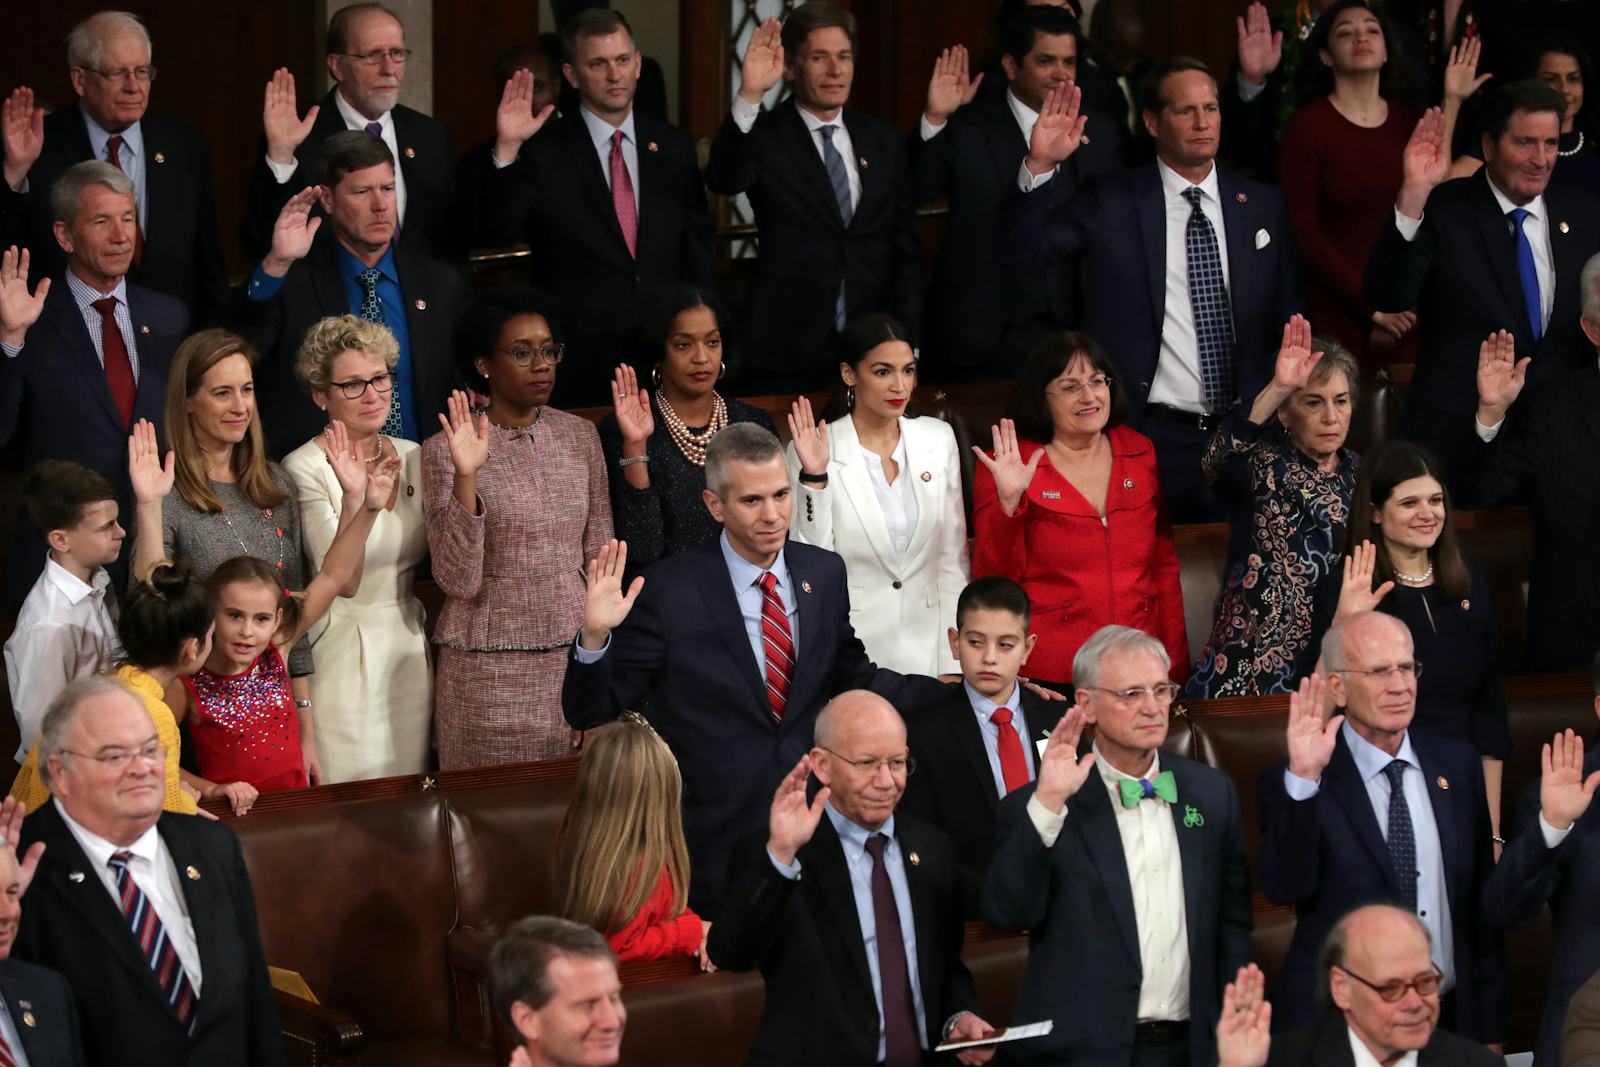 Photos Of New Members Of Congress Being Sworn In Show The New Face Of